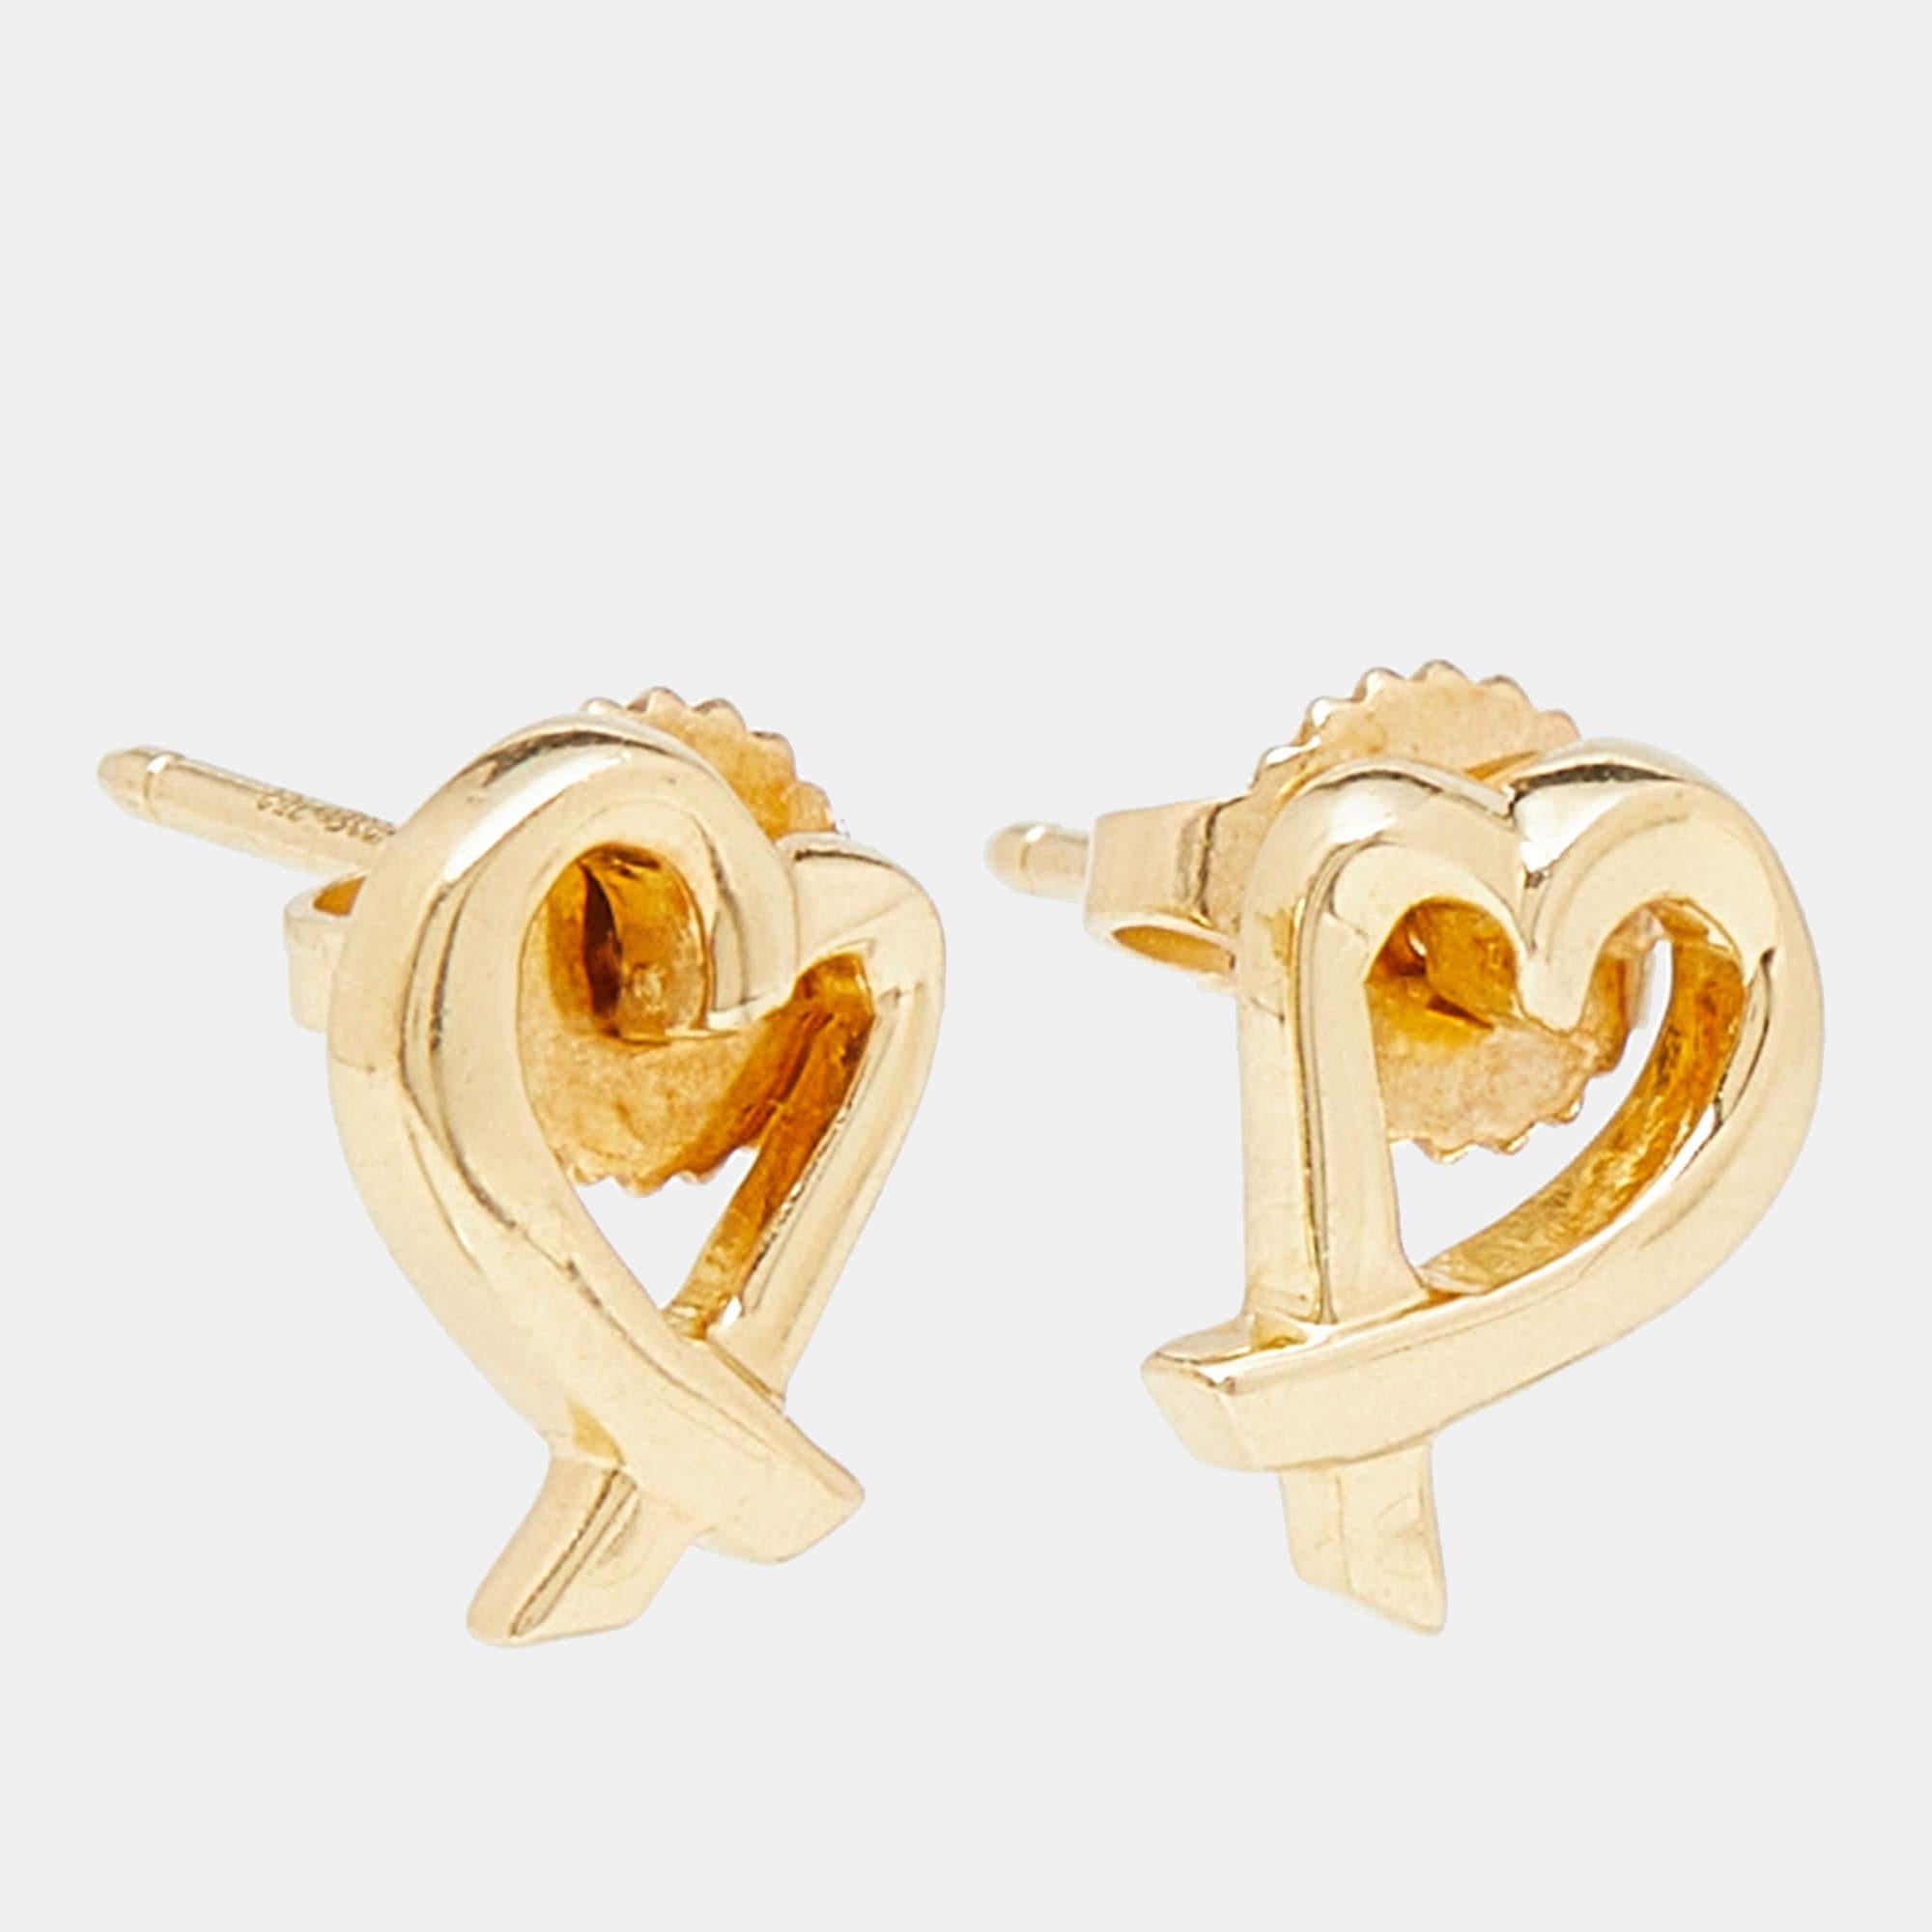 Indulge in pure elegance with these authentic Tiffany & Co. Paloma Picasso earrings. Exquisite craftsmanship and brilliant design merge to create these captivating treasures, a symbol of timeless beauty and refined taste.

